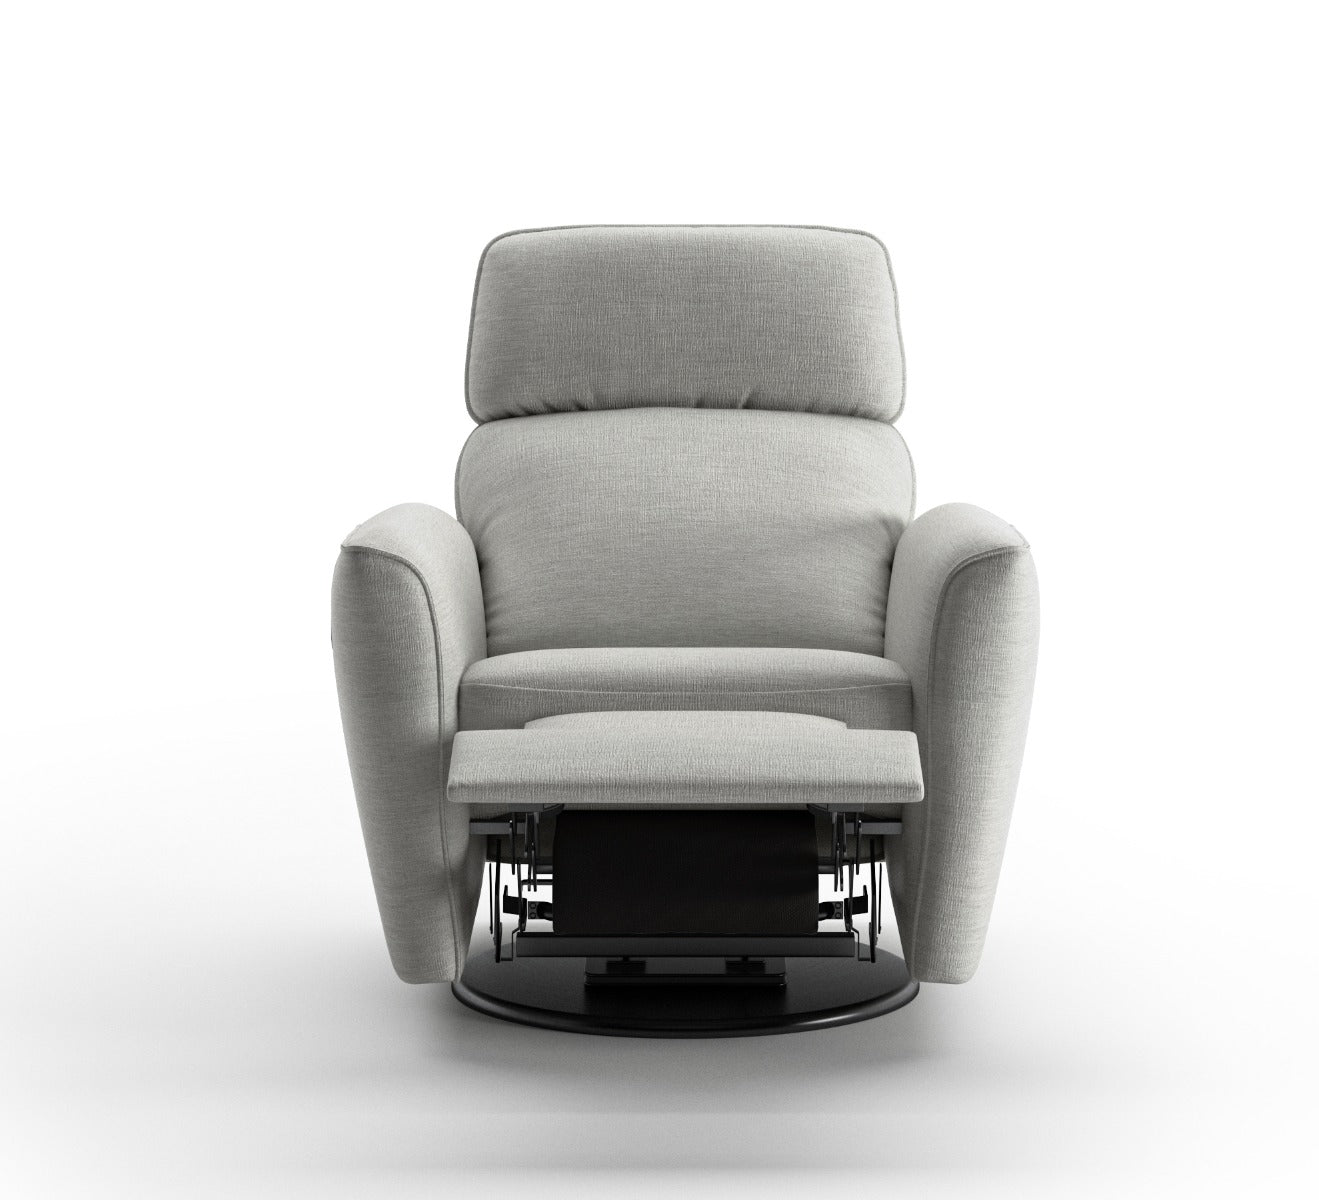 Luonto Furniture Welted Recliner - Power & Battery - Oliver 173